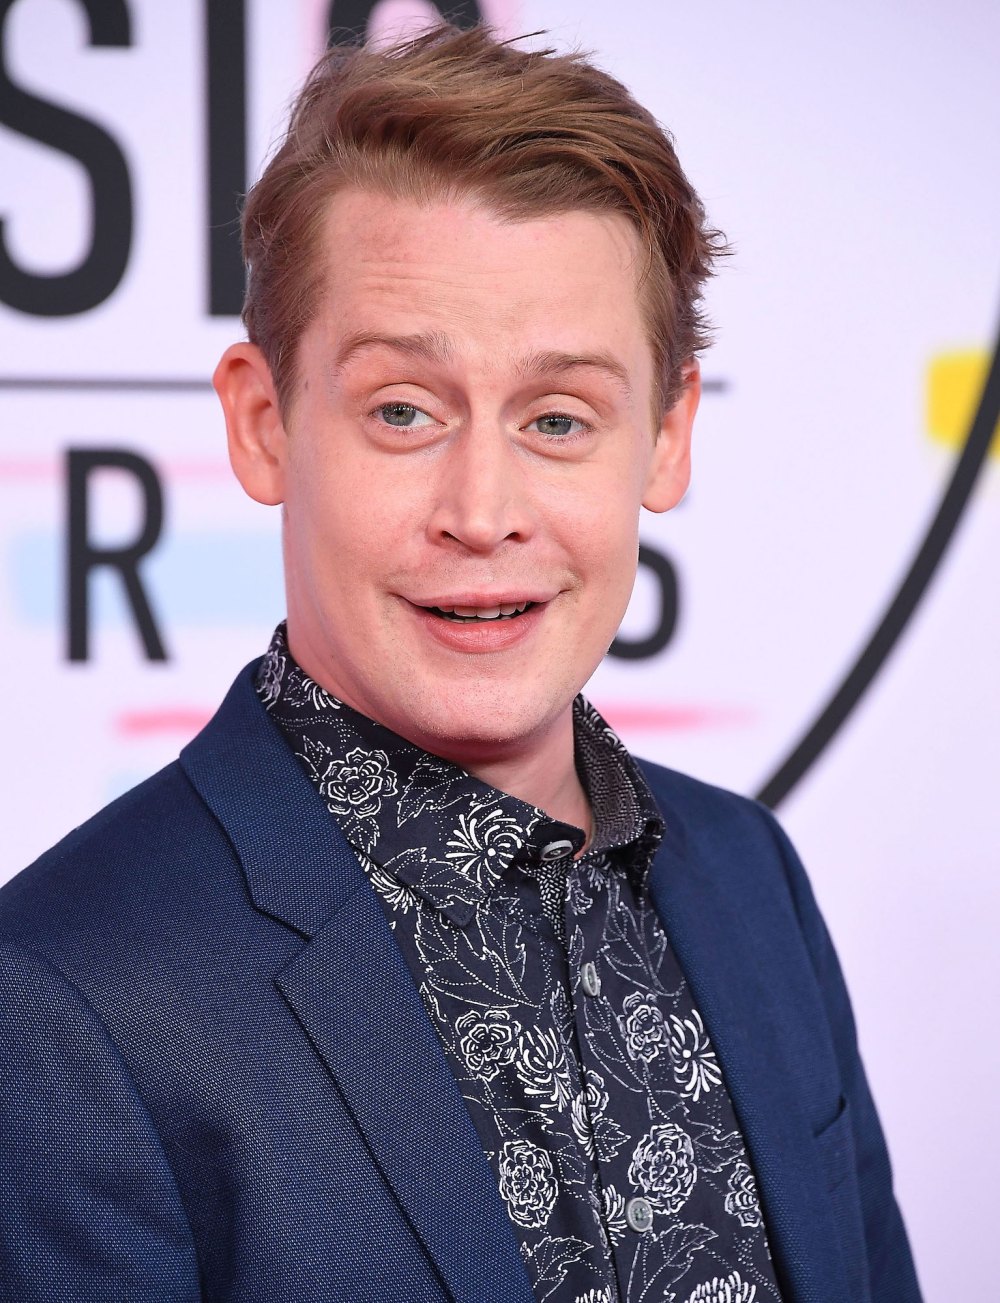 A Comprehensive Guide to the Culkin Siblings